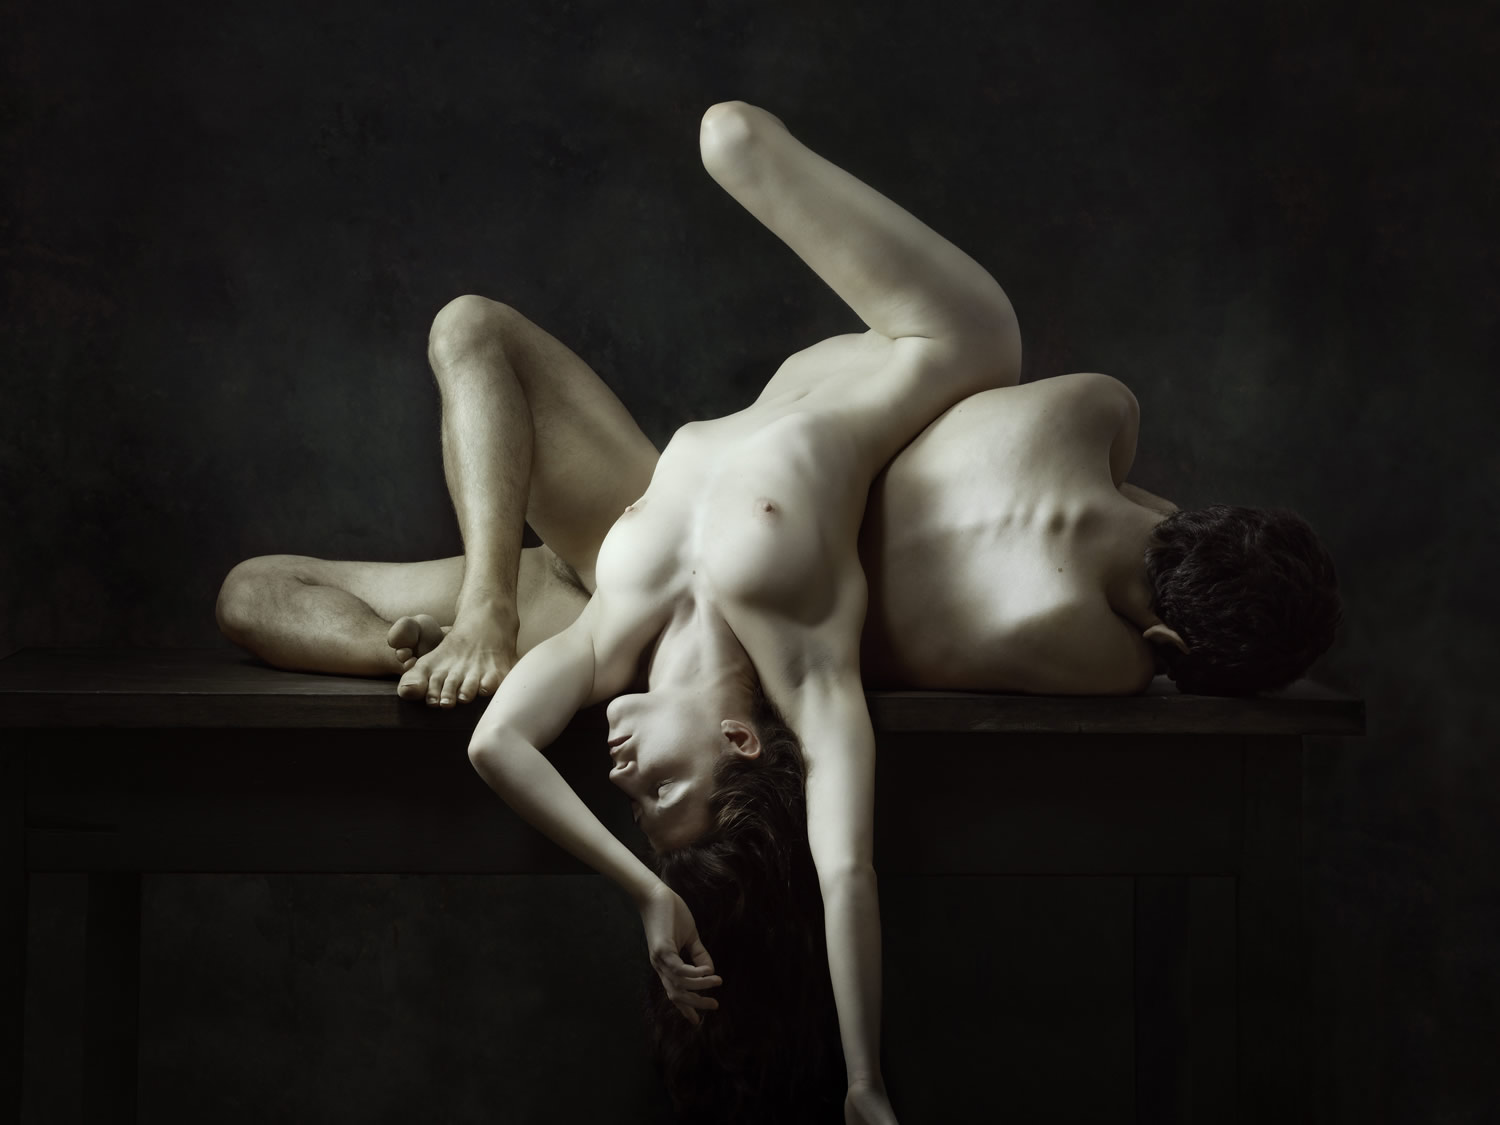 falling bodies, drifting series, photography by Olivier Valsecchi